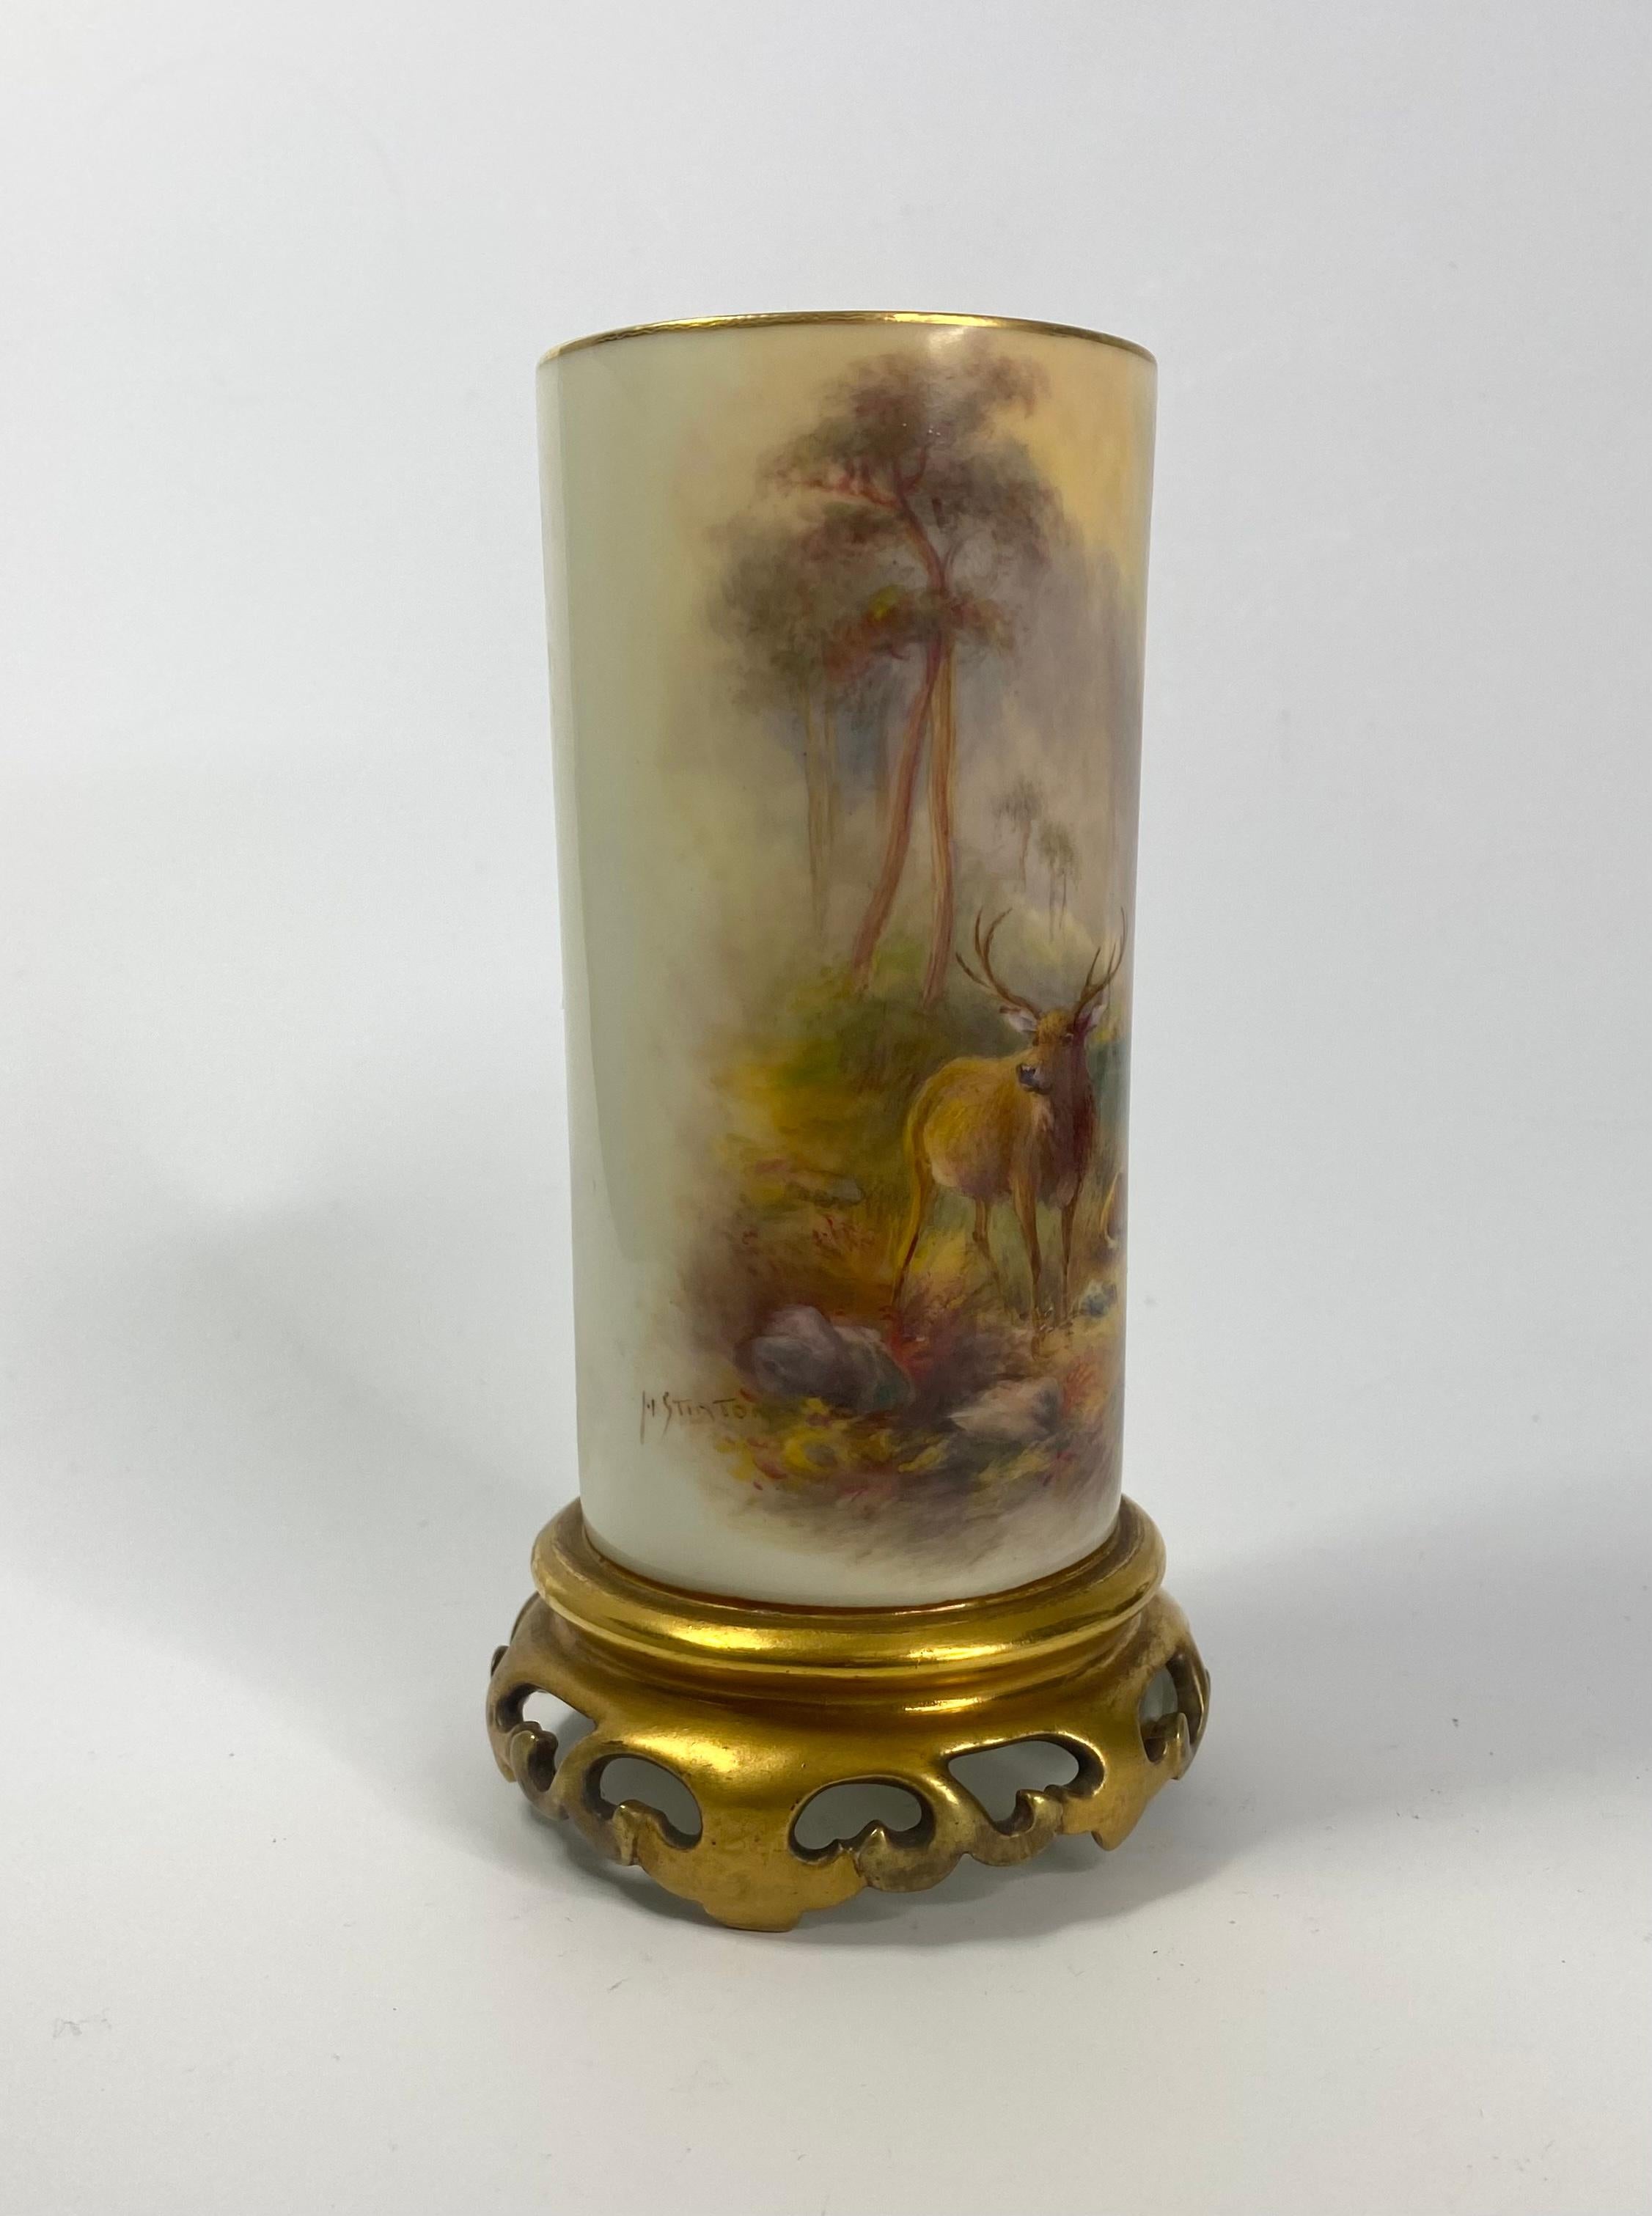 Fired Royal Worcester vase, Stags, Harry Stinton, D. 1934